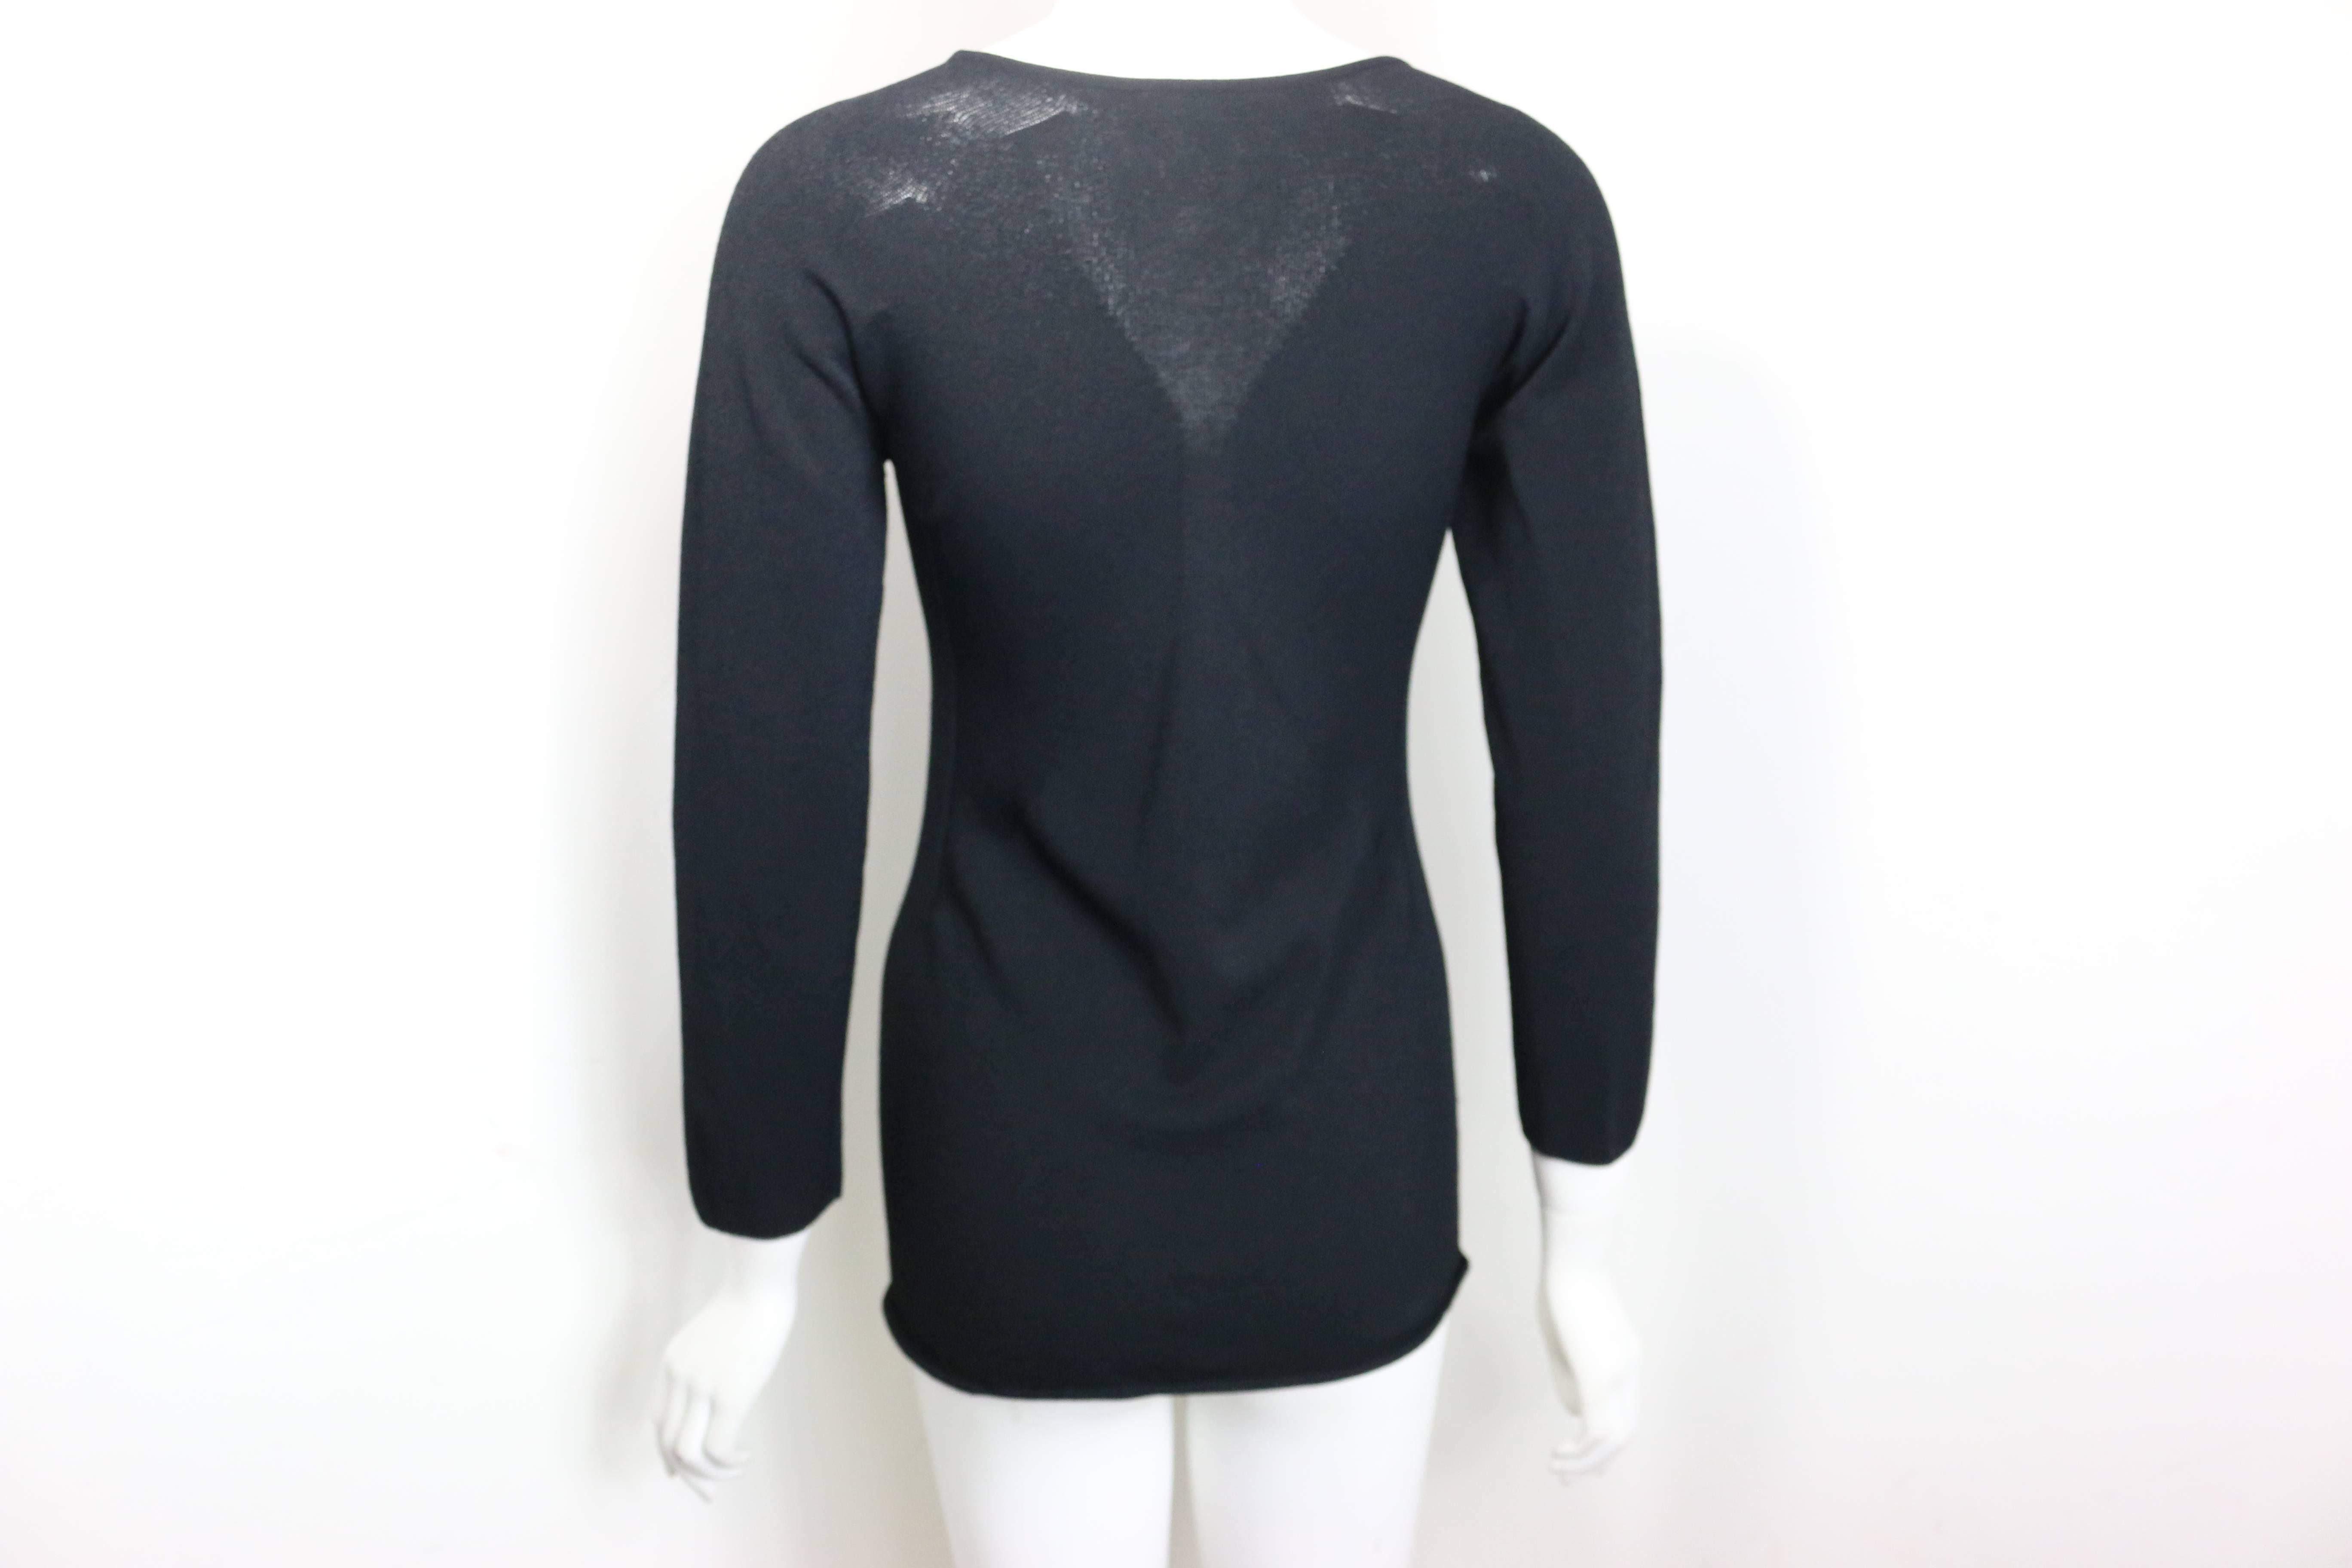 - Chanel black 3/4 sleeves top from 2002 cruise collection. 

- Made in France. 

- Size 44. 

- 75% Rayon, 25% Polyester. 